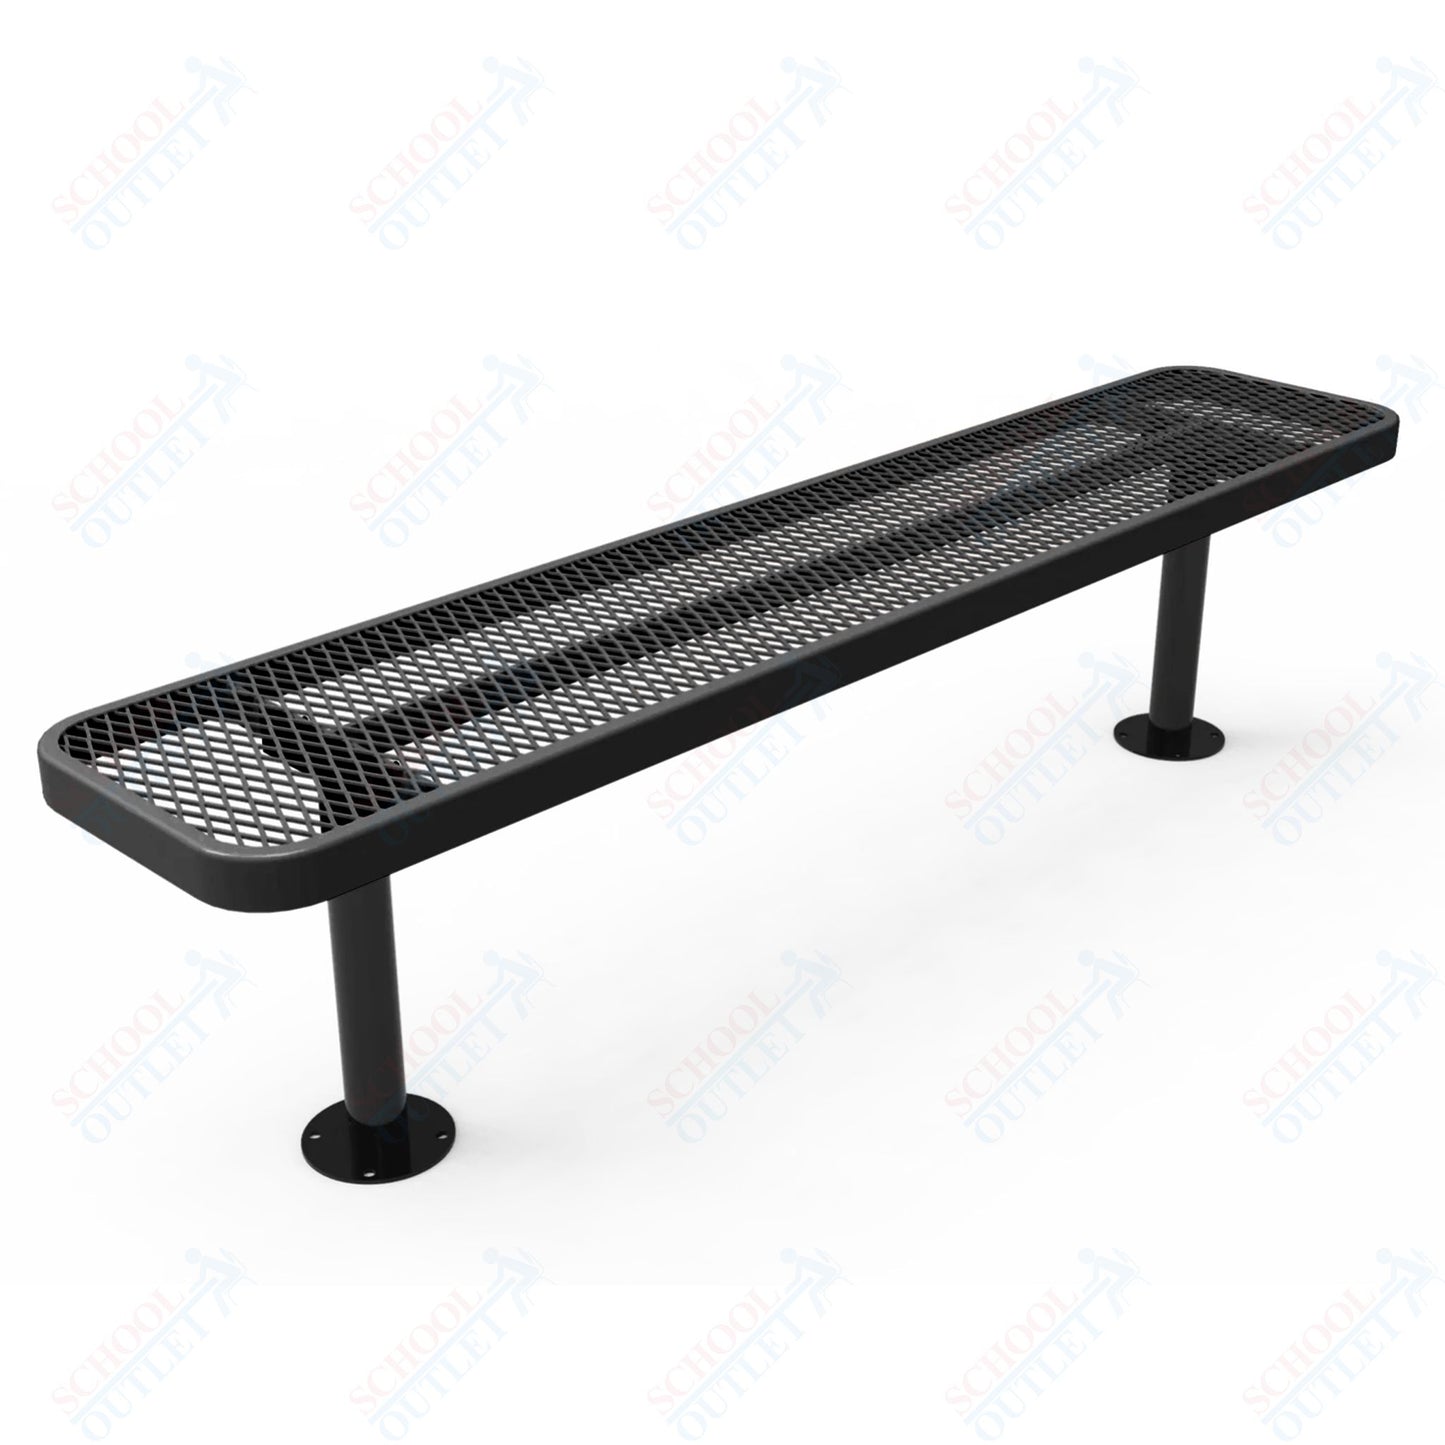 MyTcoat - Player's Outdoor Bench without Back - Surface Mount 6' L (MYT-BPY06-35)